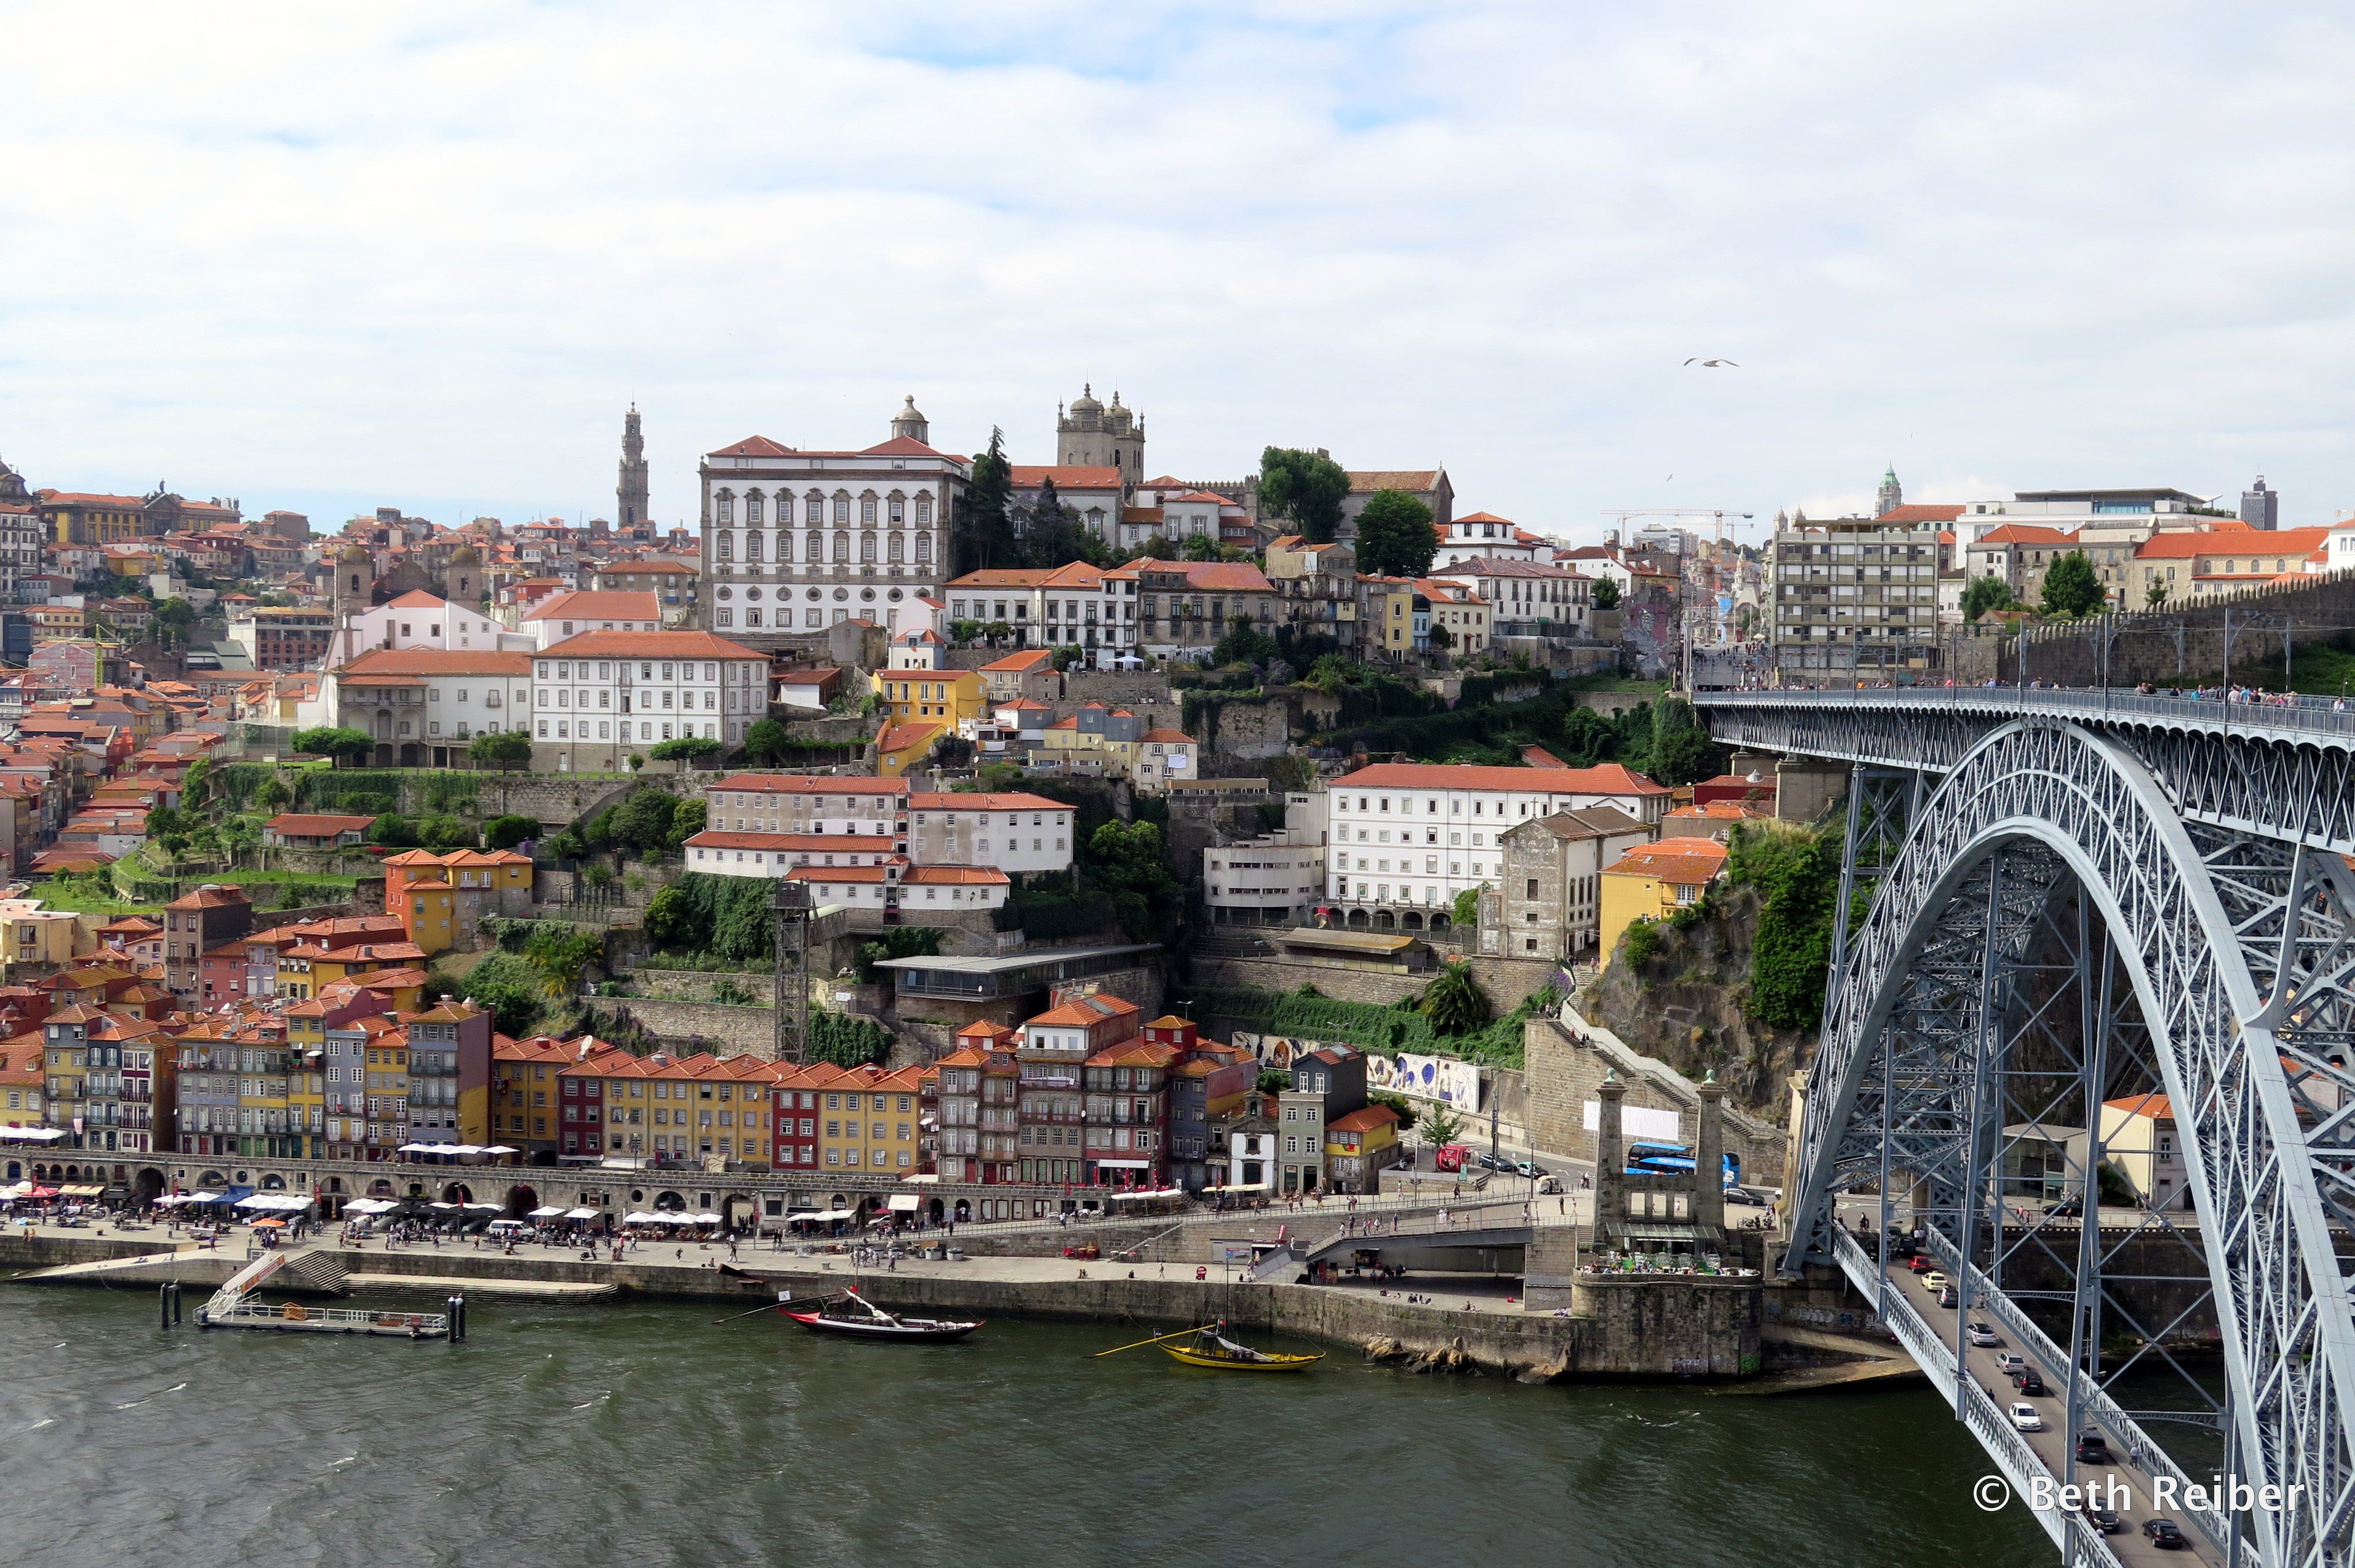 The Ribeira district and Ponte Luiz I bridge are reasons why Porto is the Portuguese city you shouldn't miss